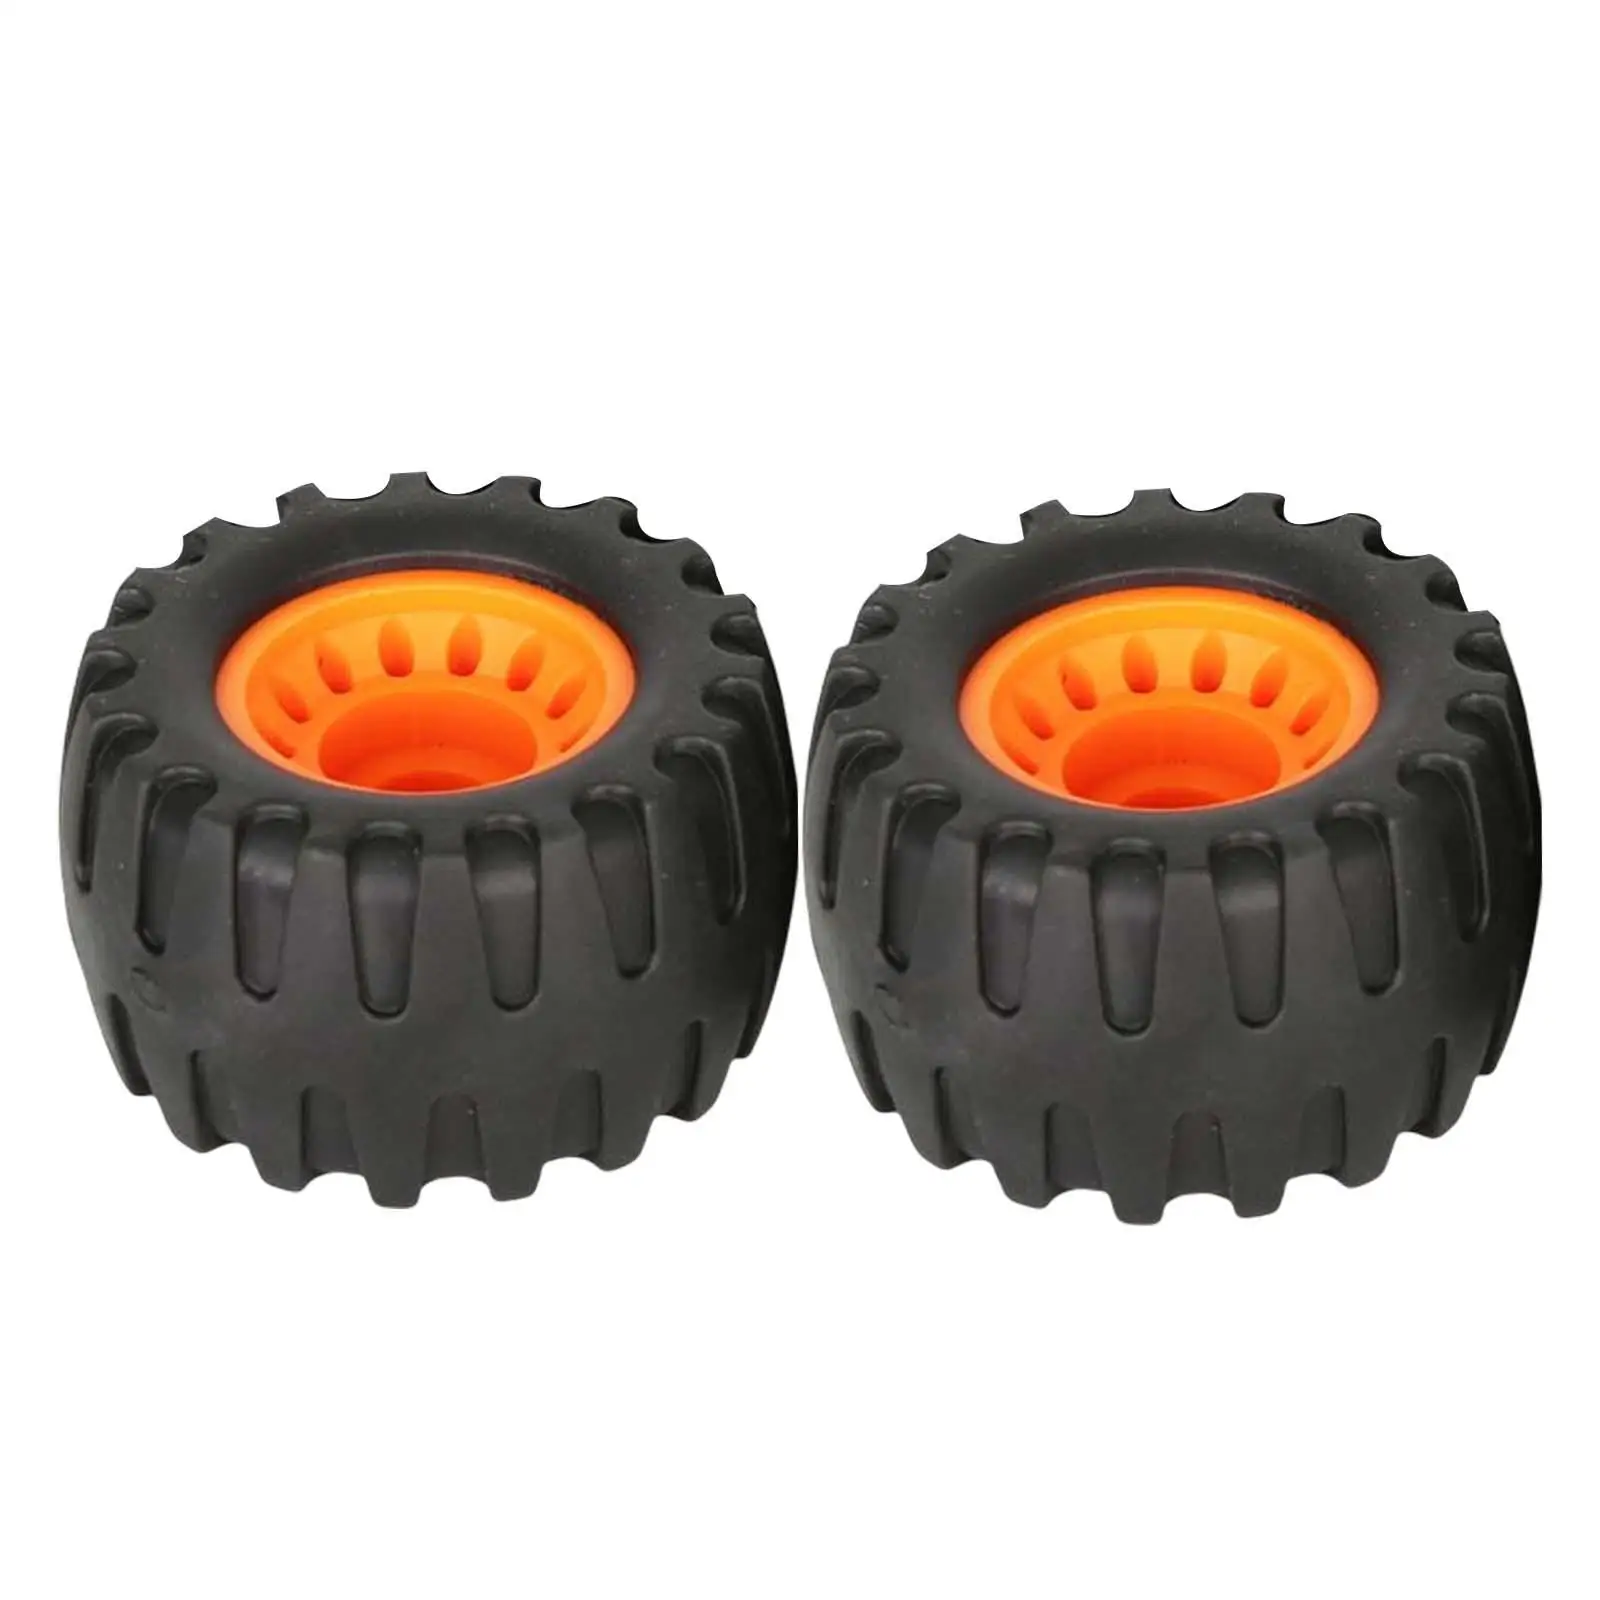 2Pcs Skateboard Wheels Damping Wheel Replacement Wear Resistant 76Mmx45mm 78A Smooth Longboard Wheels for Off Road Road Street